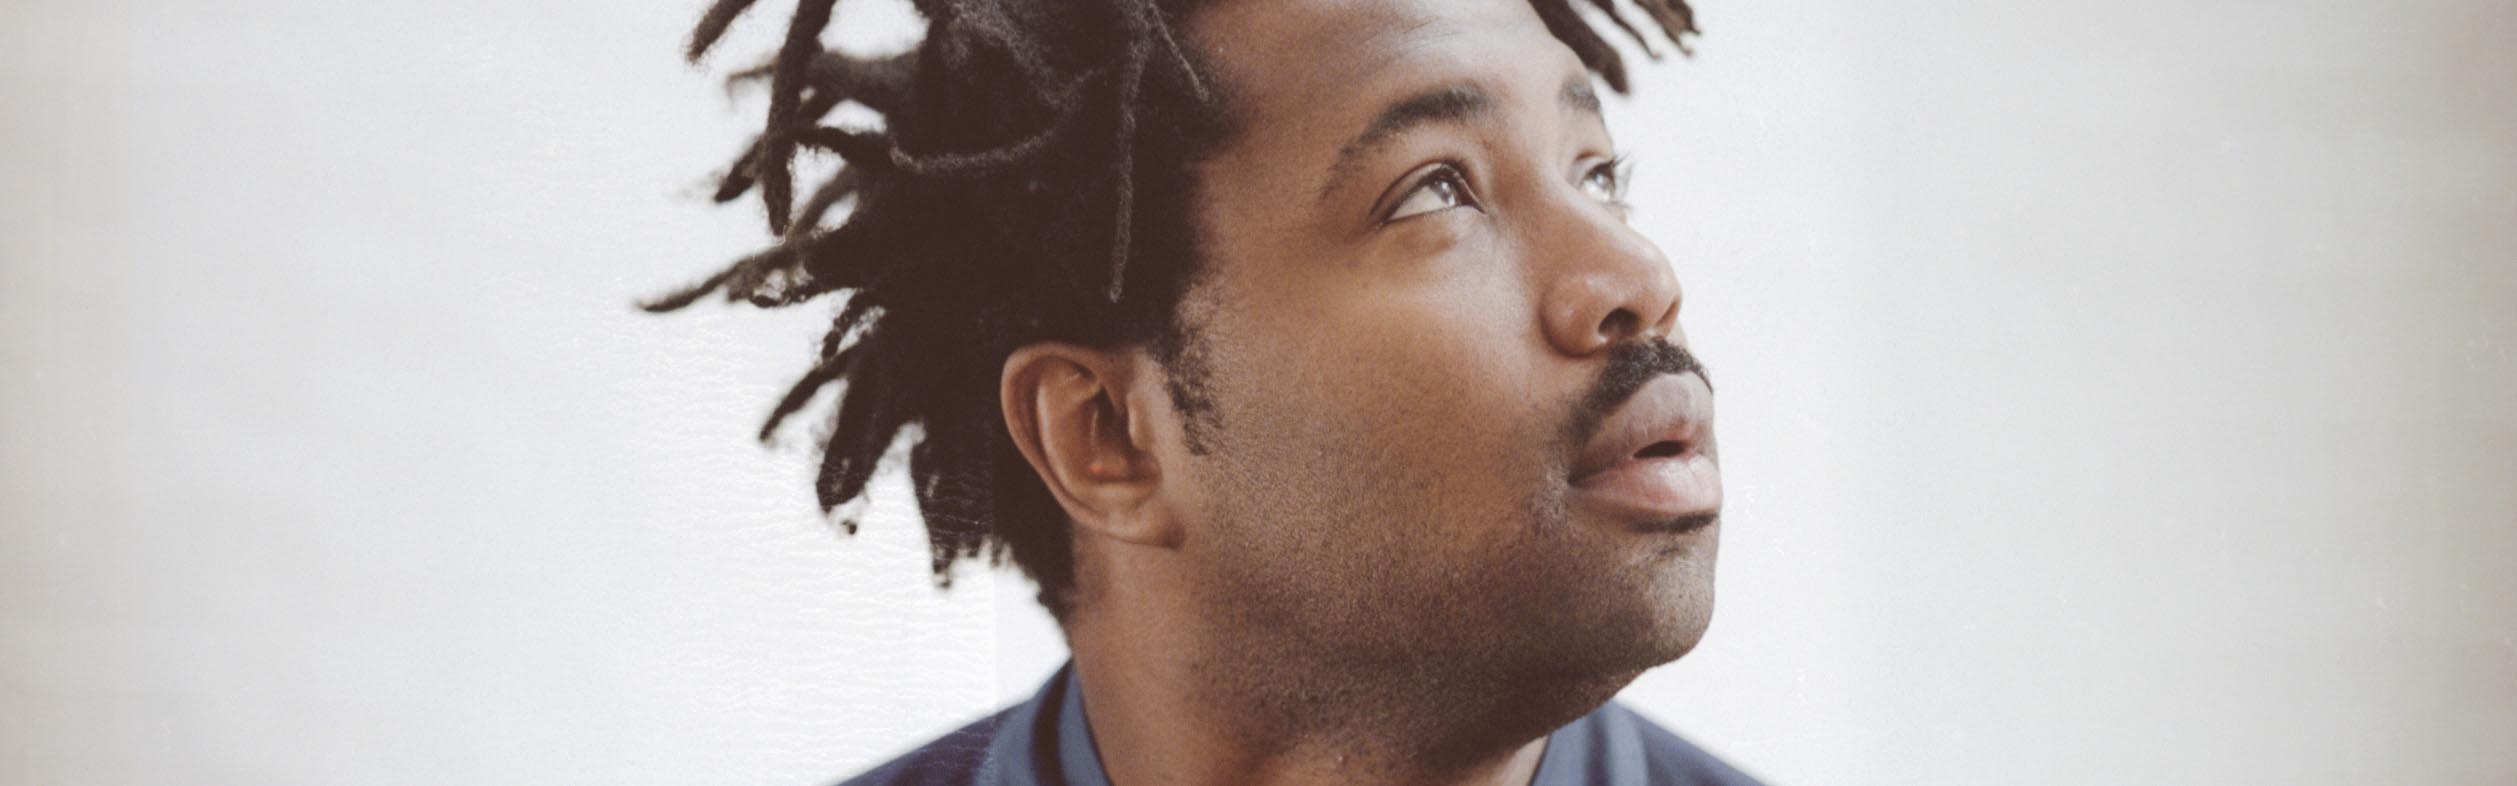 Sampha Blood On Me Launch Image small